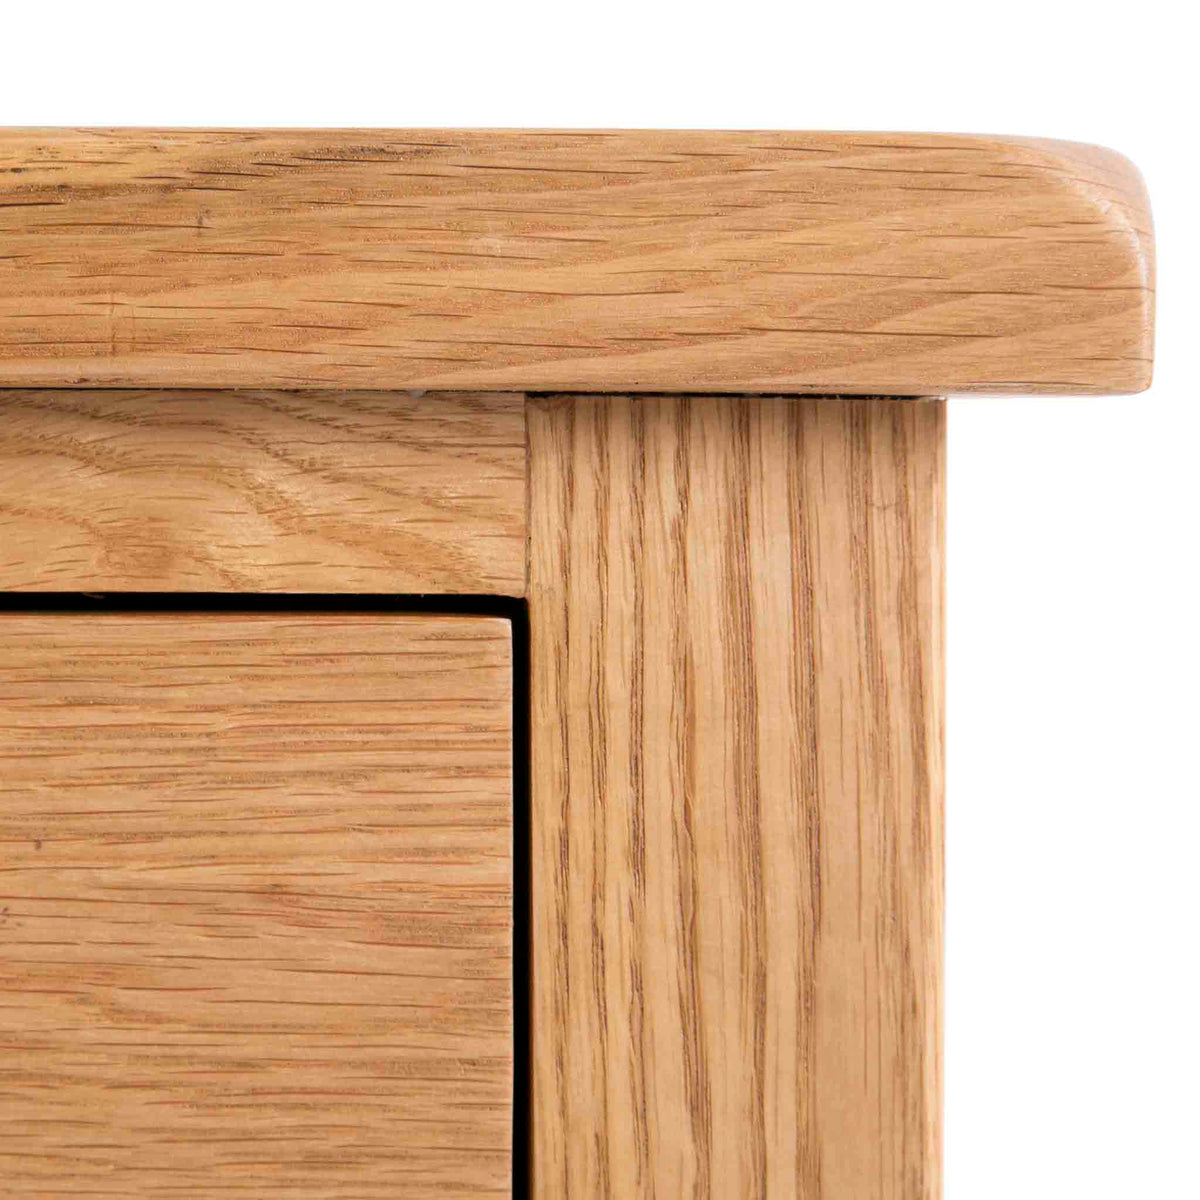 Surrey Oak Large Chest Of Drawers - Close up of top right front of drawers